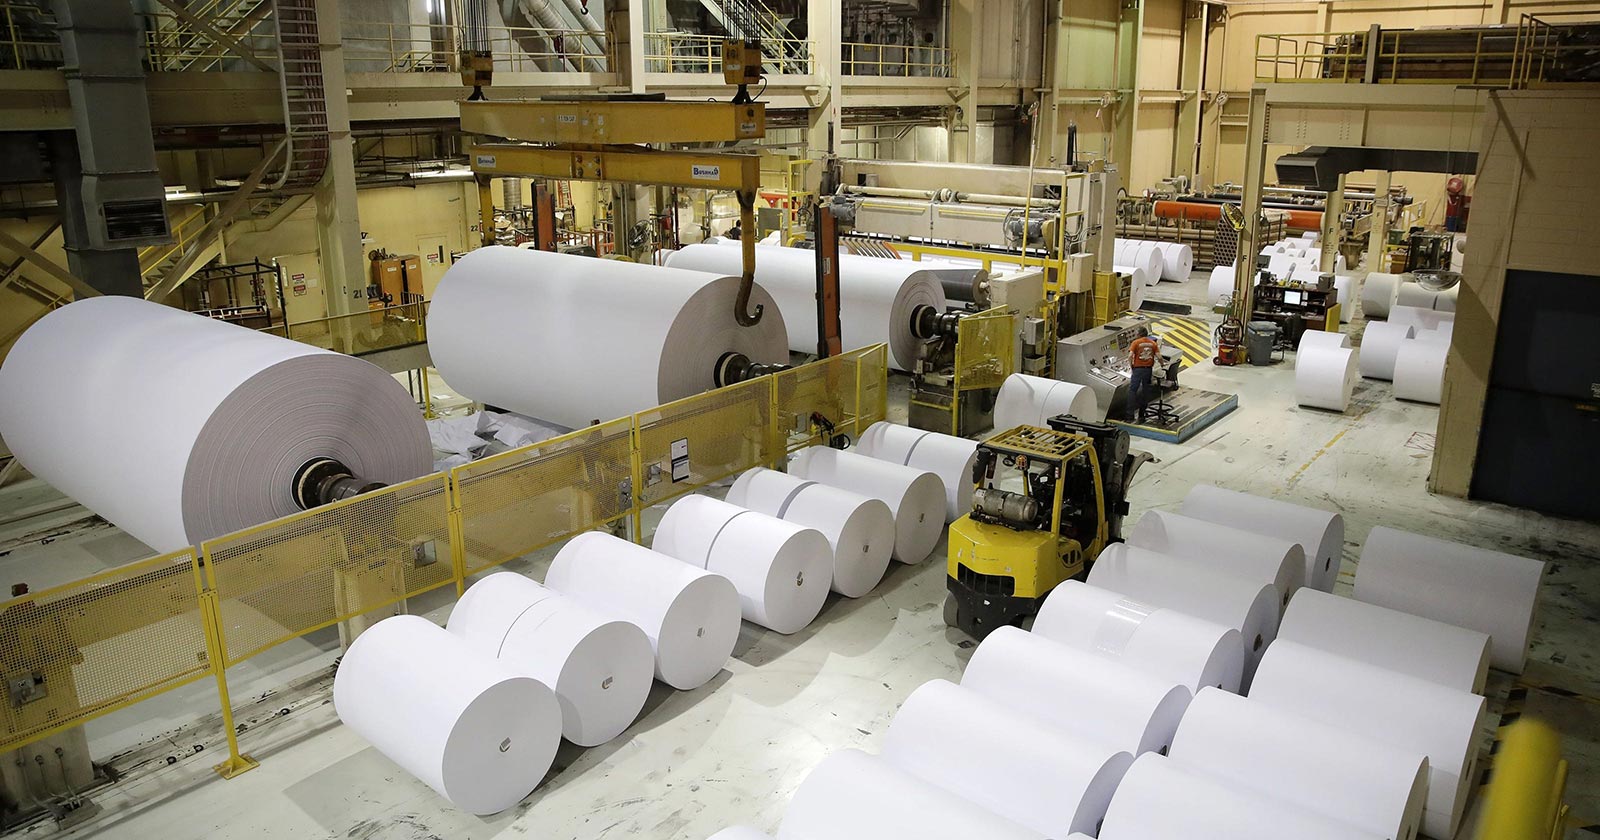  The very first paper production process